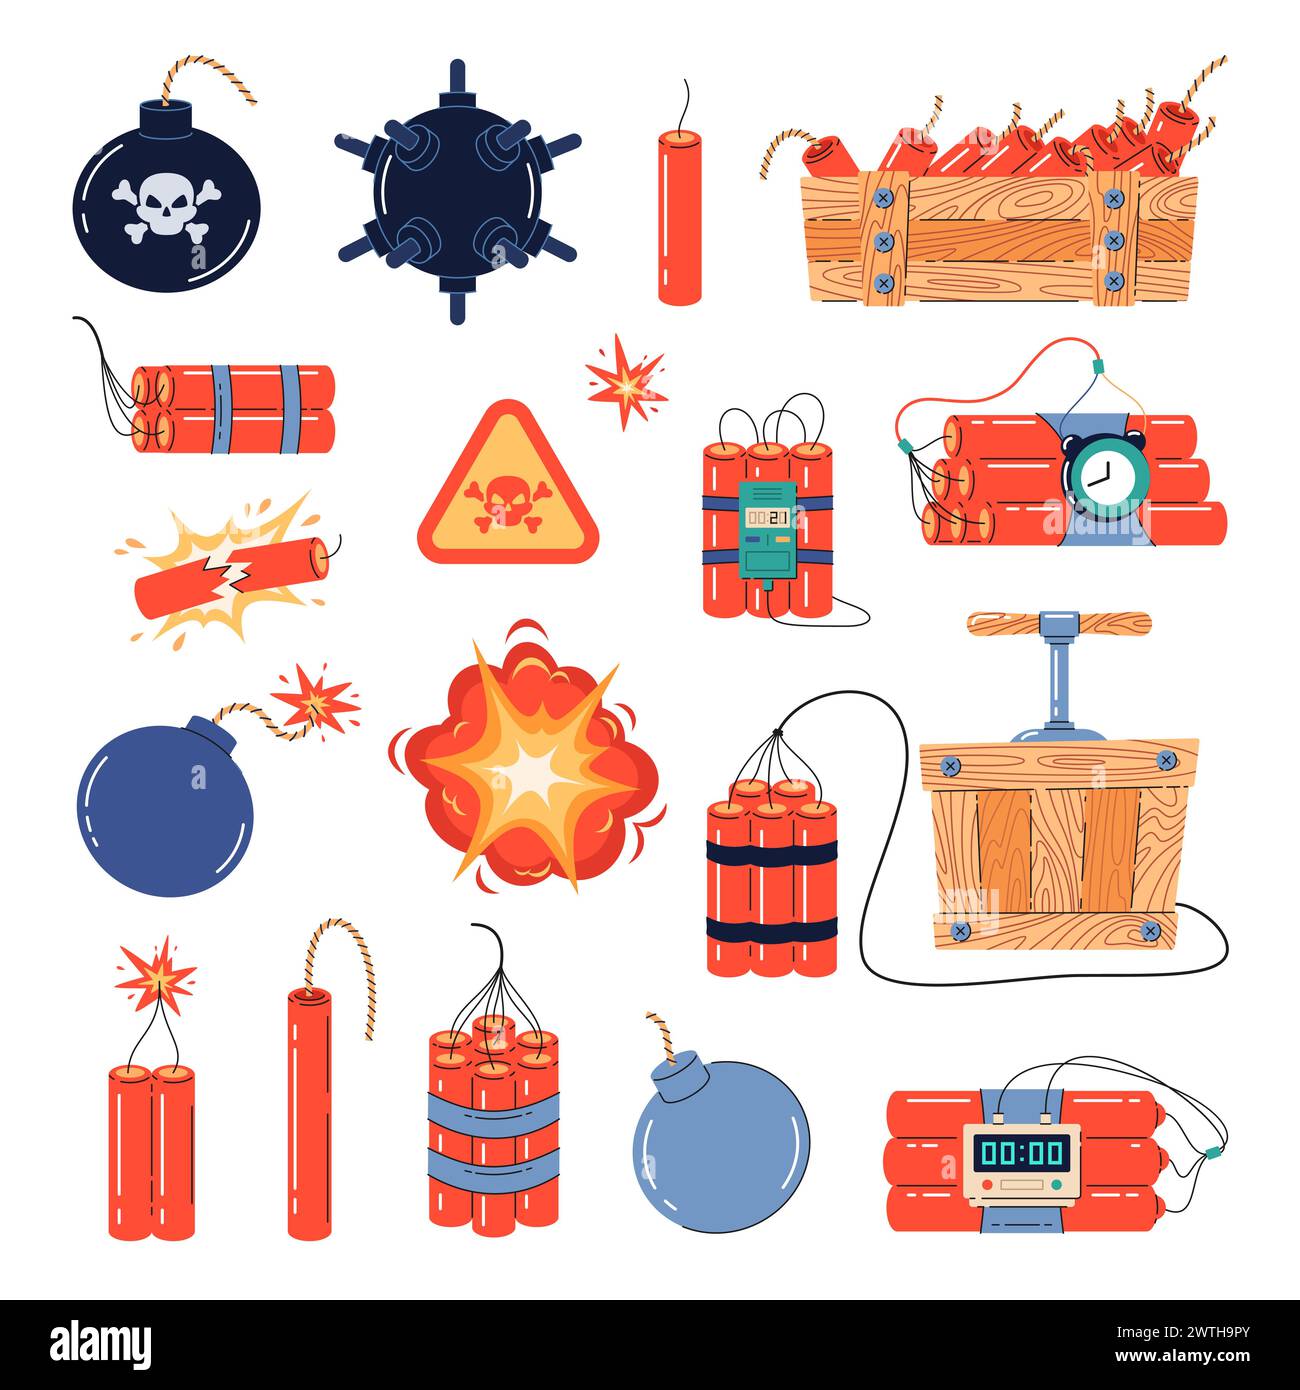 Explosives types. Cartoon dynamite and bombs, weapons of mass destruction, detonators, timers, smoldering wicks, military danger, tnt with burning Stock Vector